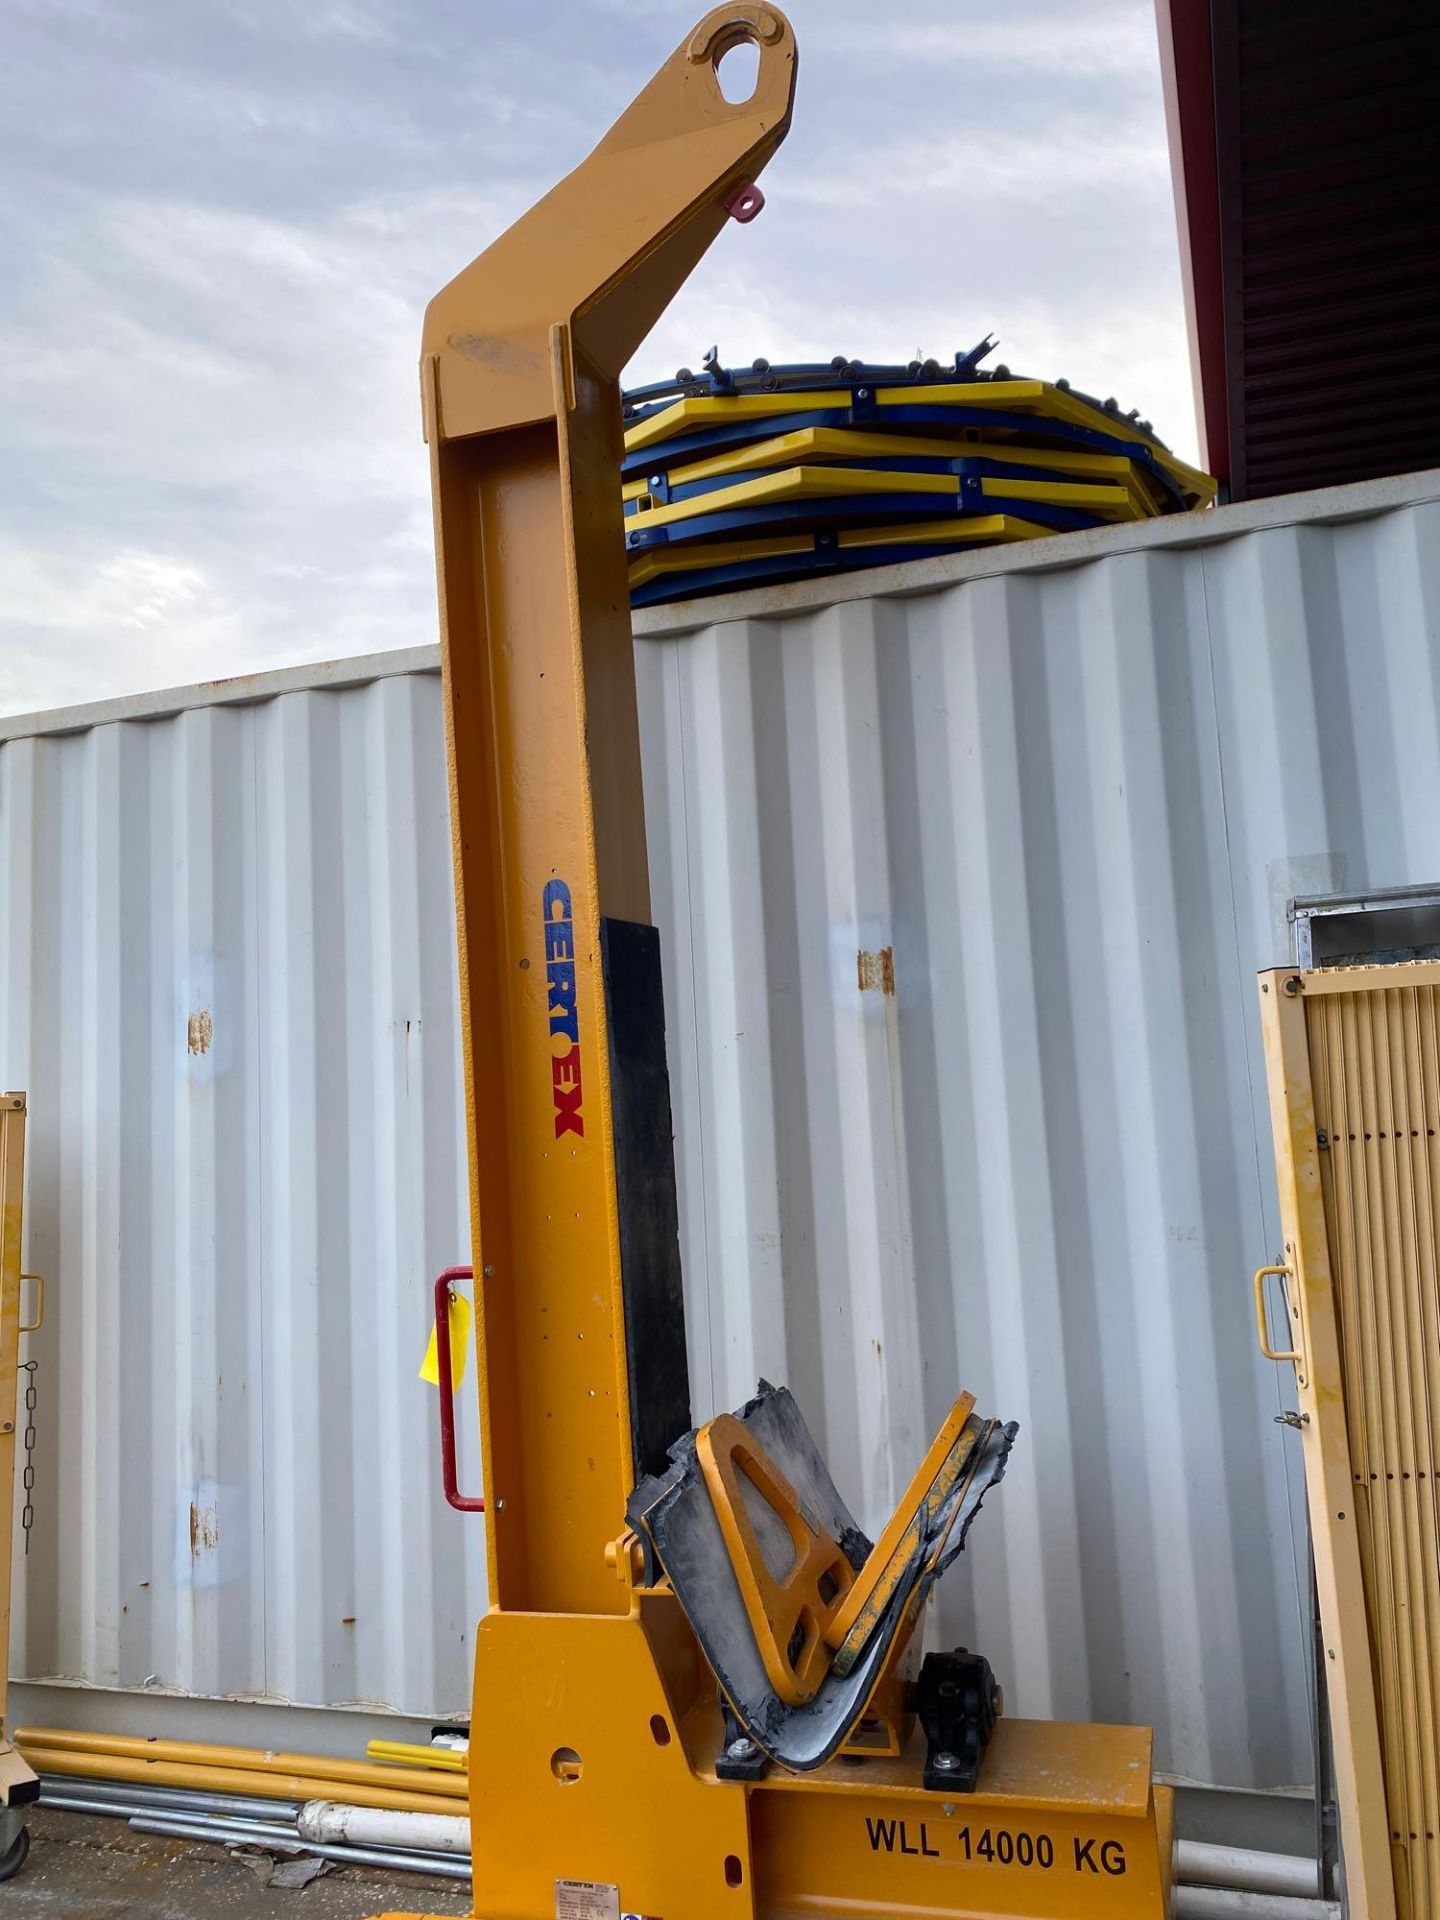 2019 CERTEX LIFTING BEAM FOR TIP END TYPE LM-074271, 14,000 KG CAP, ATTACHMENTS AND WEIGHTS INCLUDED - Image 3 of 6